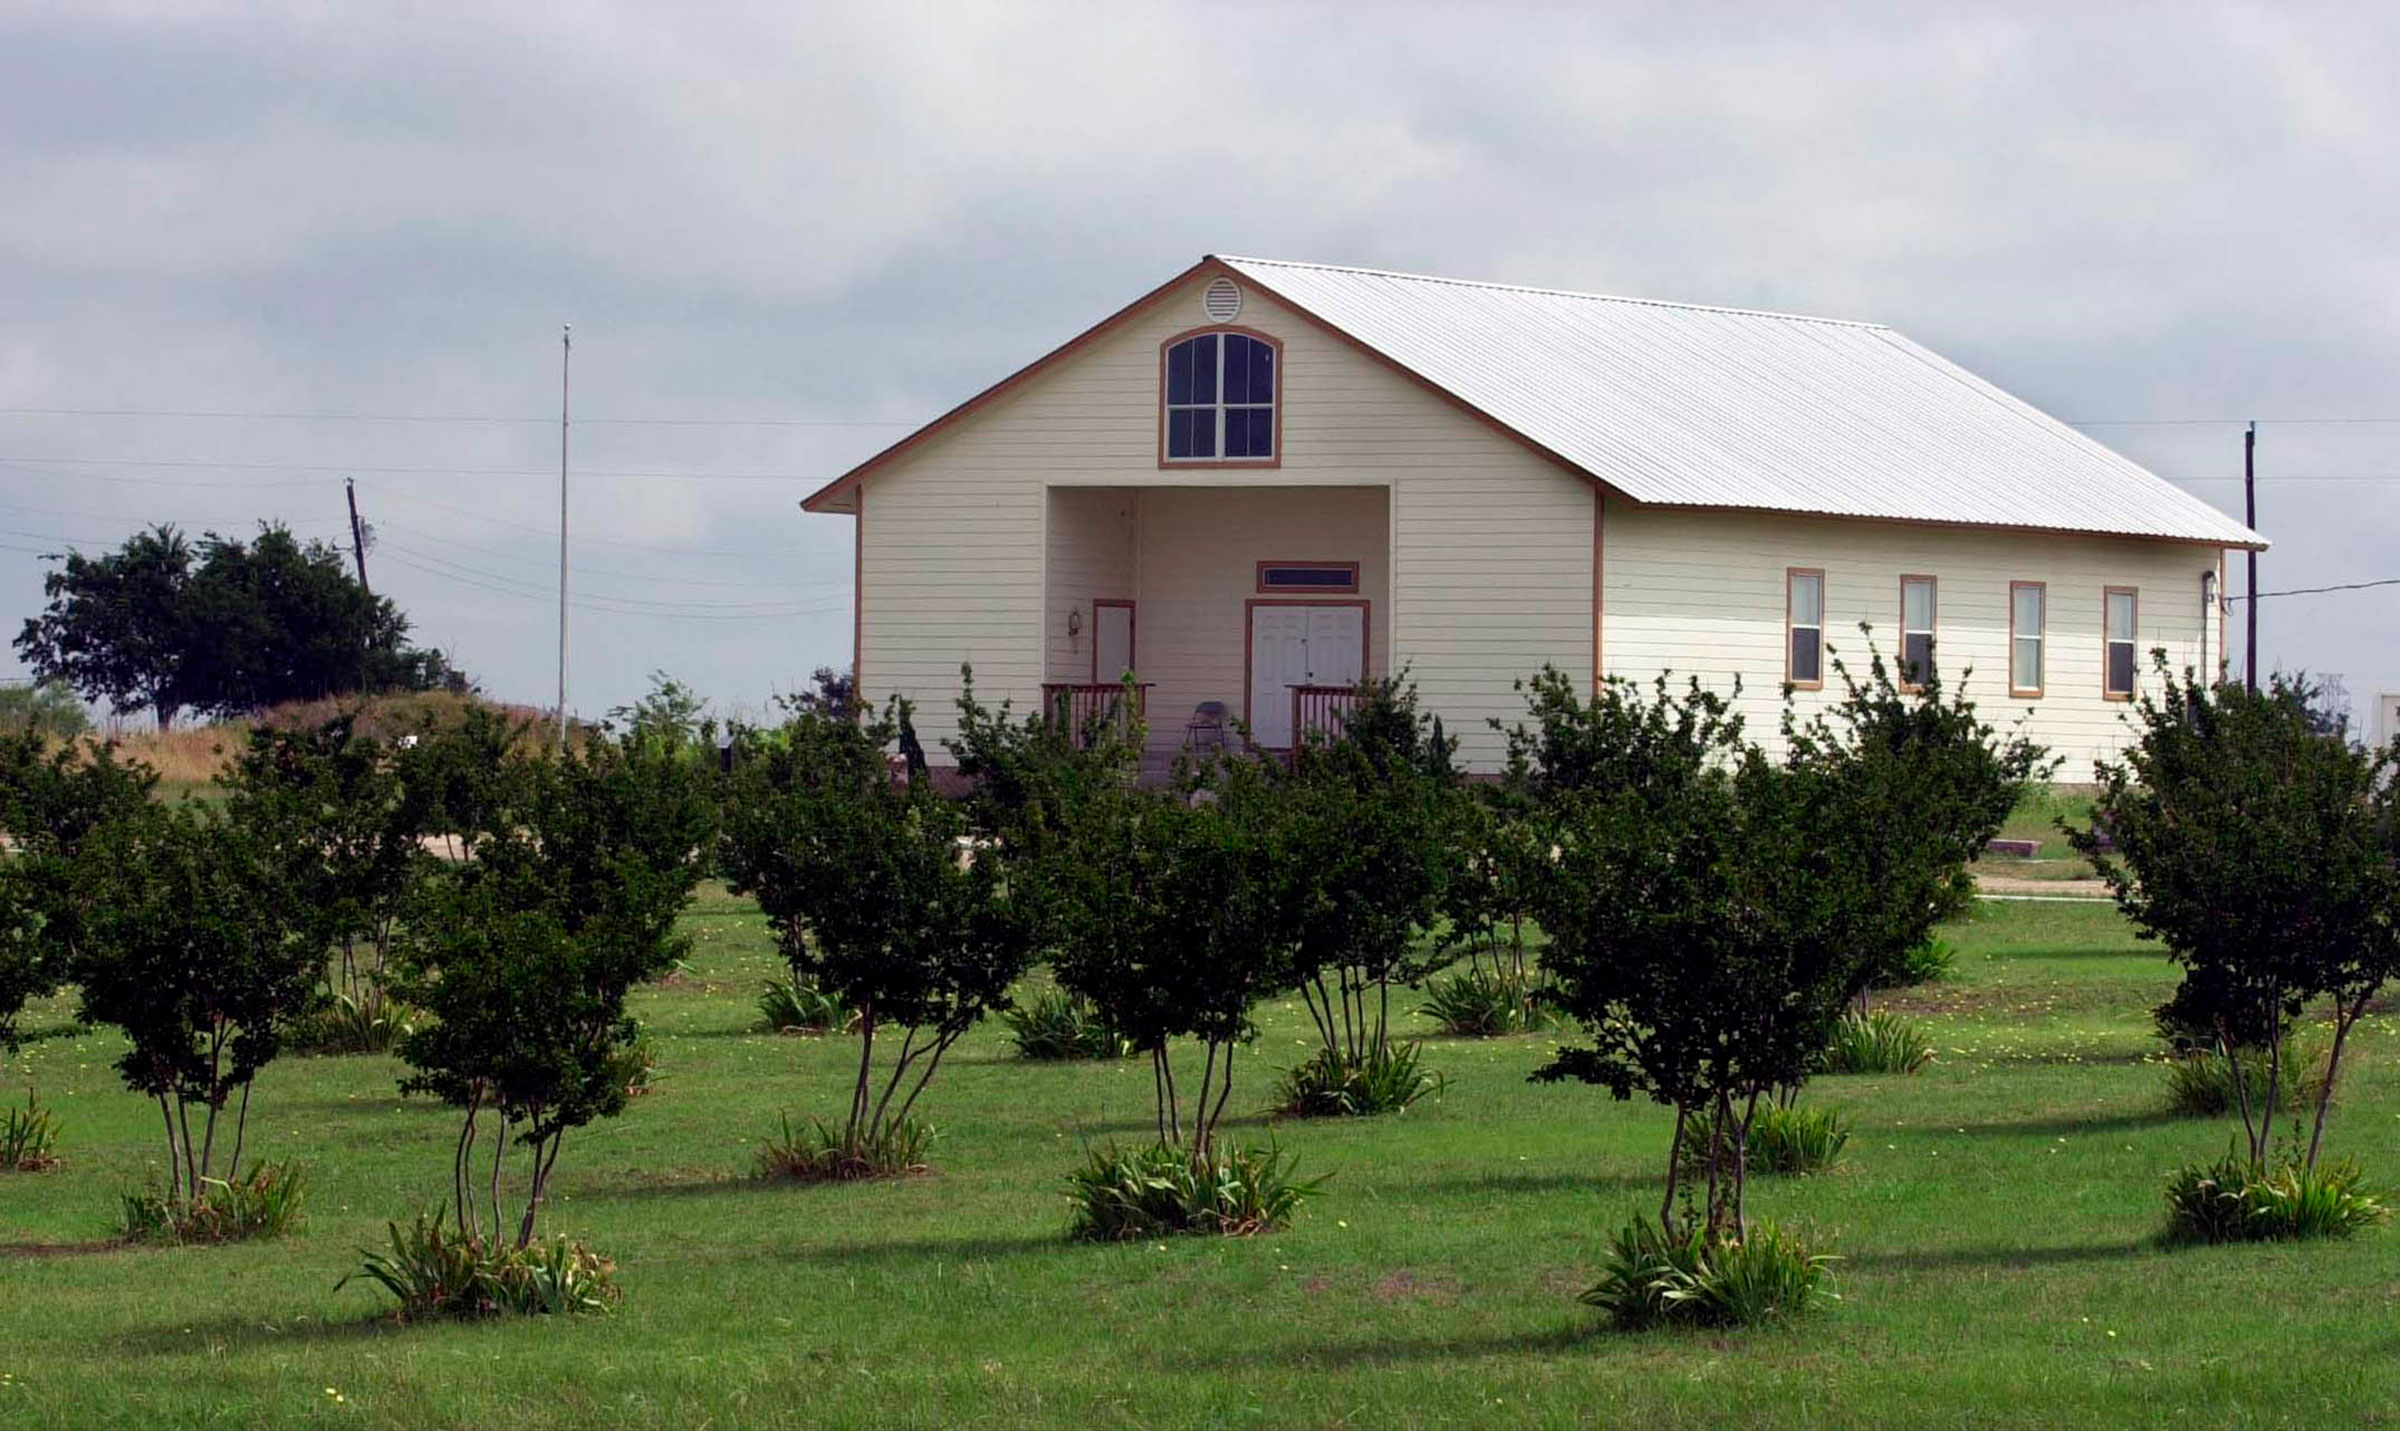 This small chapel in Waco, Texas, 09 June 2001 sta